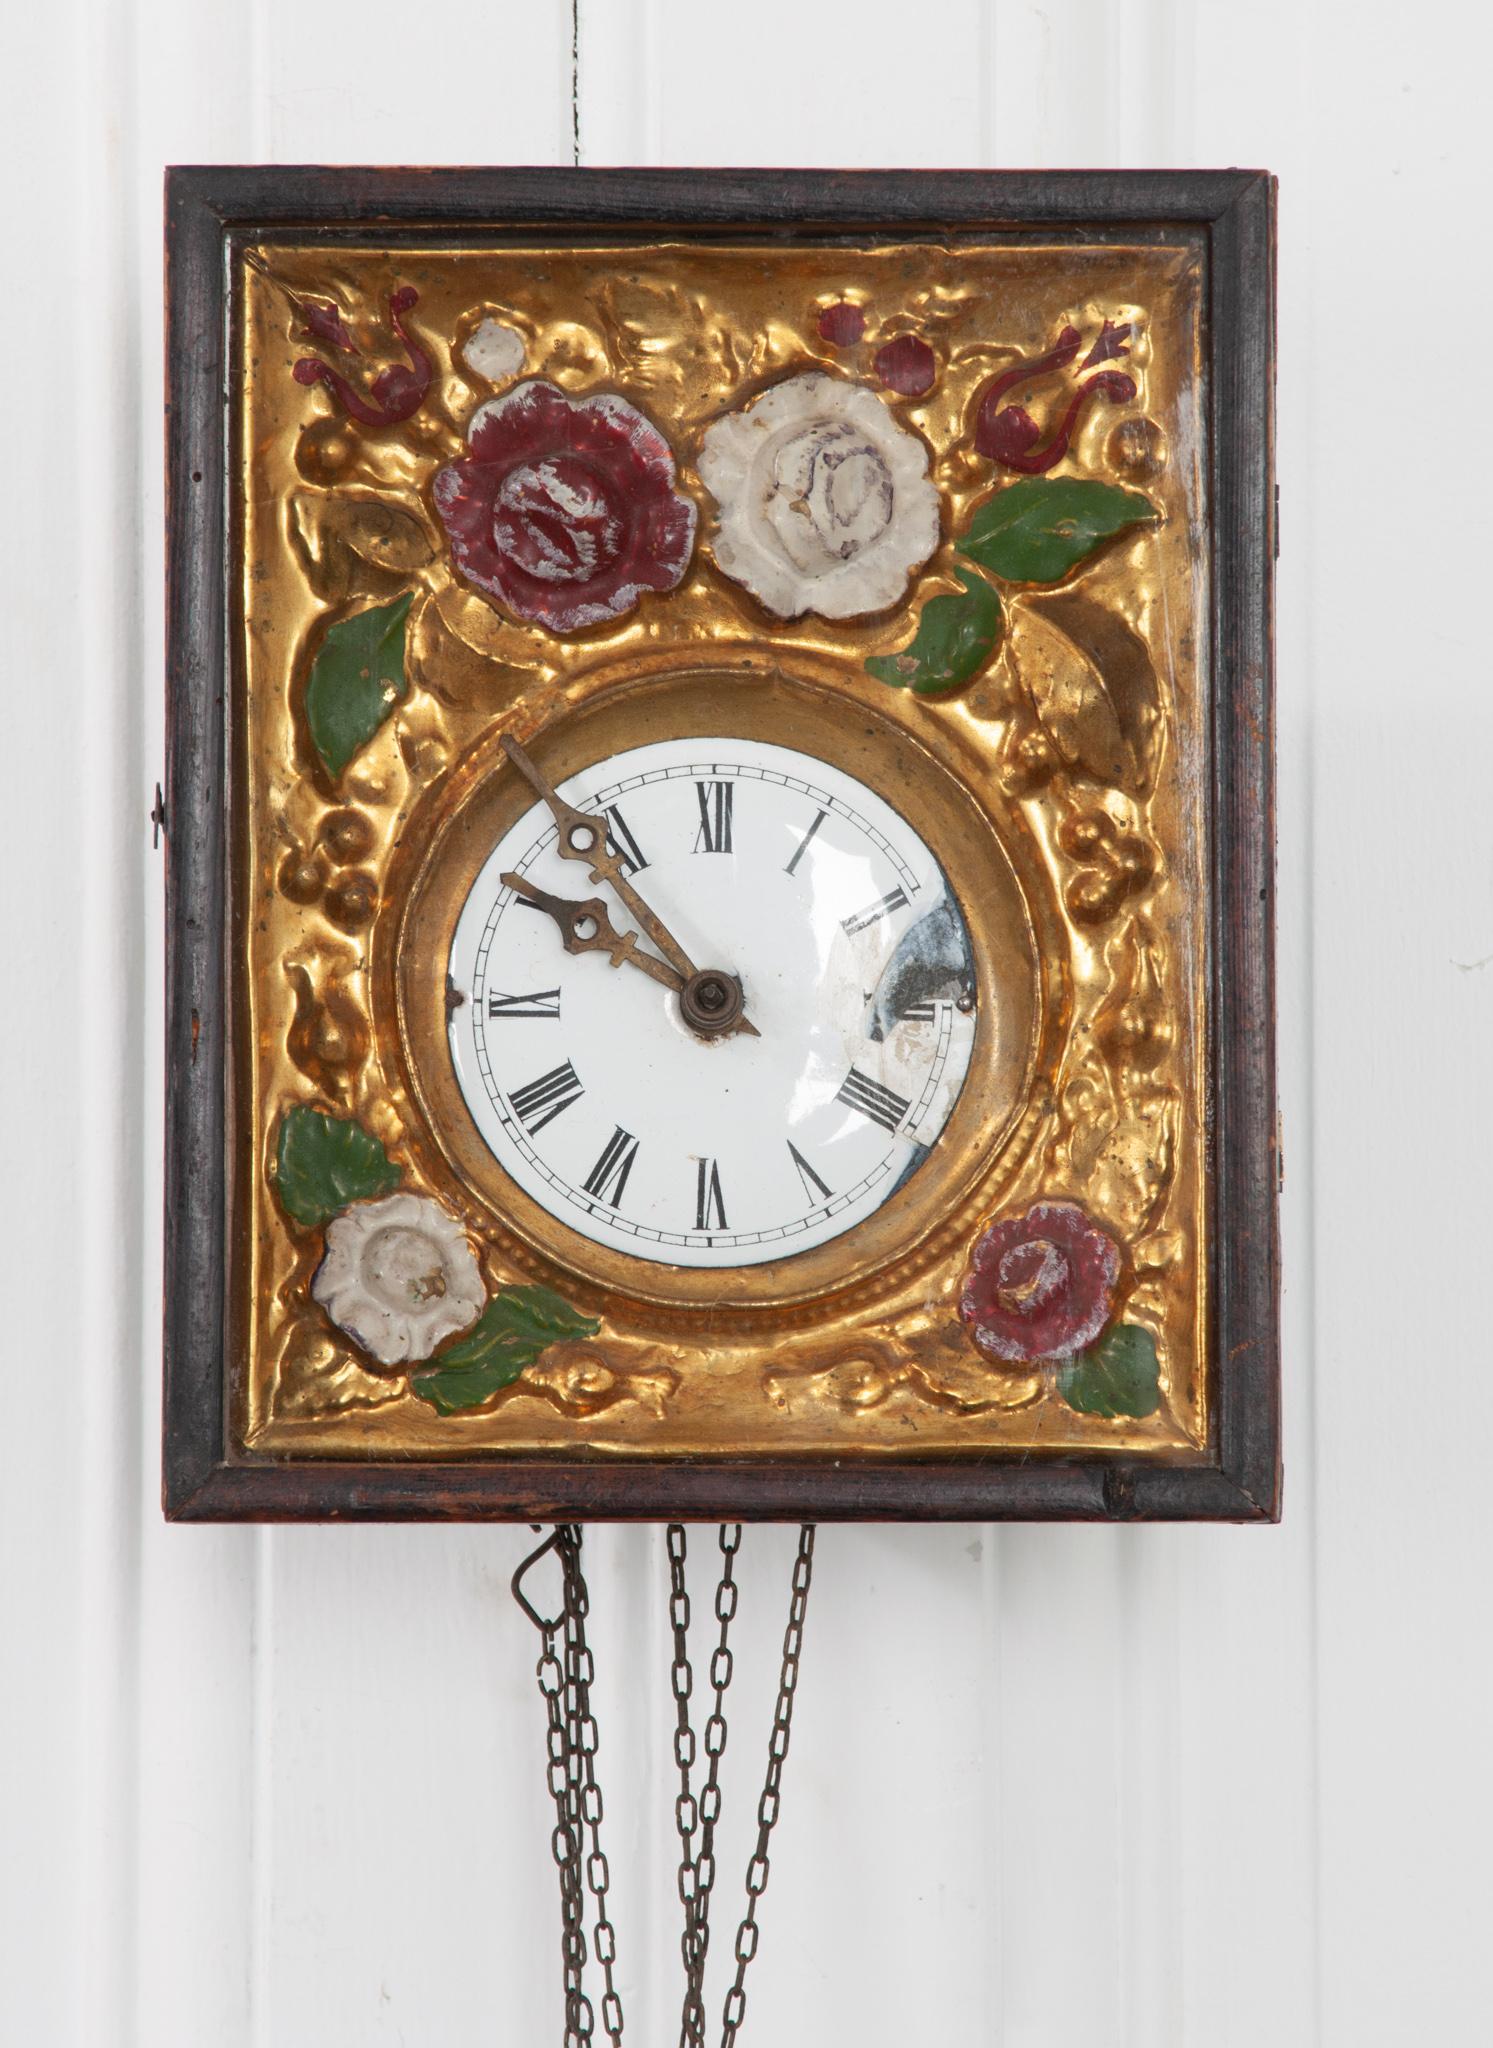 Although this French 19th century framed clock no longer works, the beauty of its composition gives it another life as a work of art. Behind the glass, the clock face is set in a beautifully stamped and painted metal plate. Age and use have given